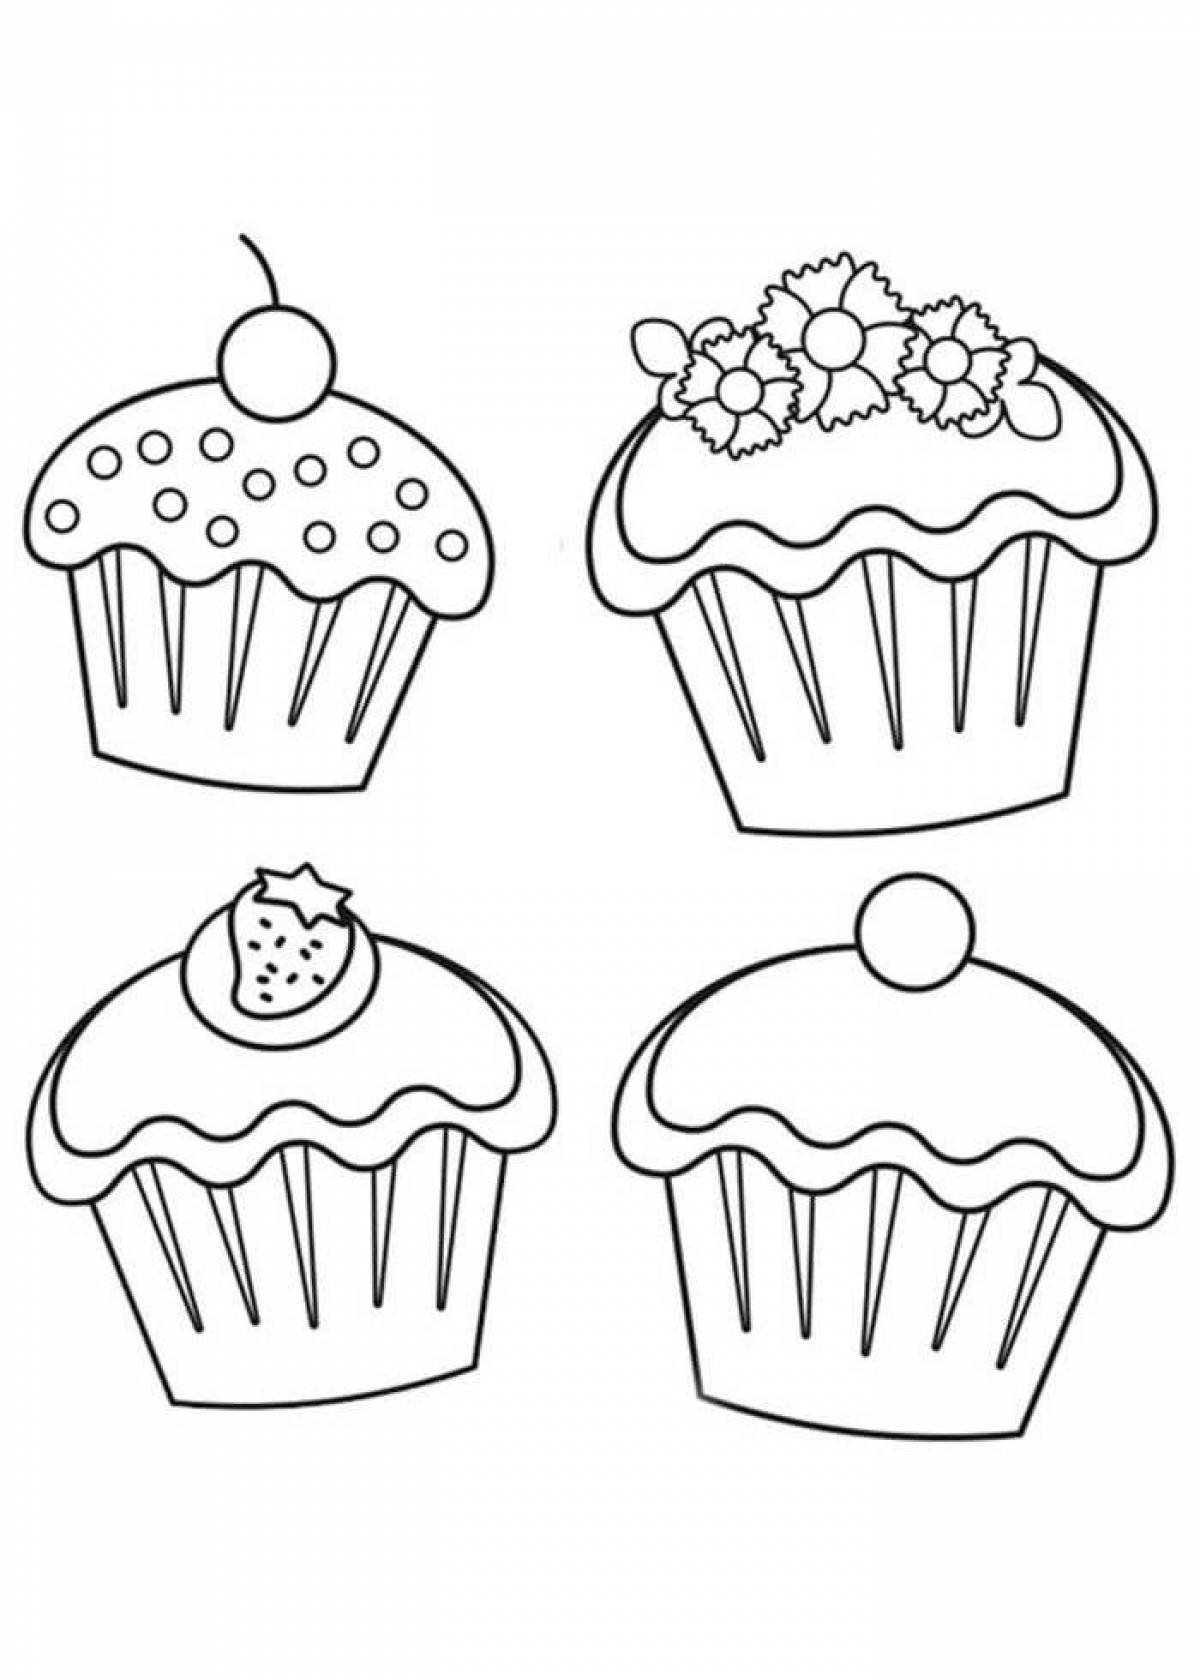 Awesome cupcake coloring page